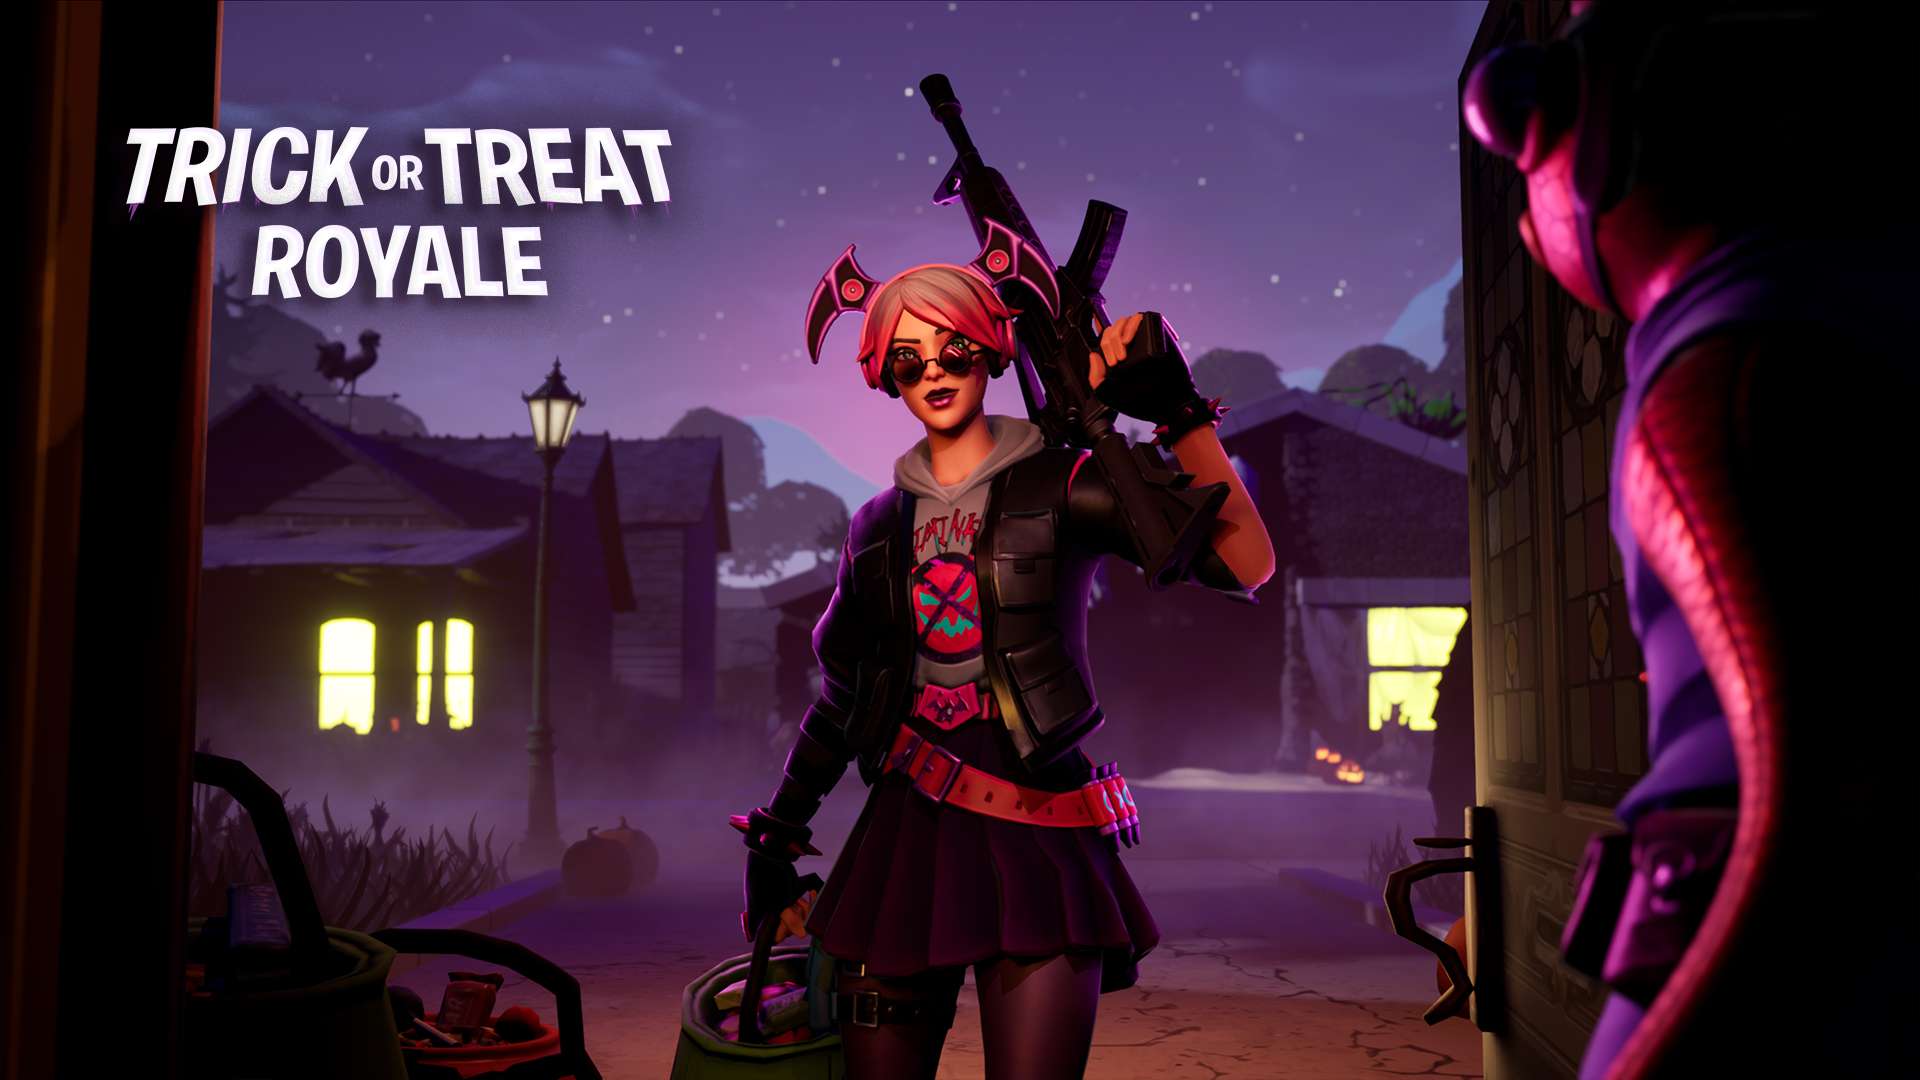 TRICK OR TREAT ROYALE